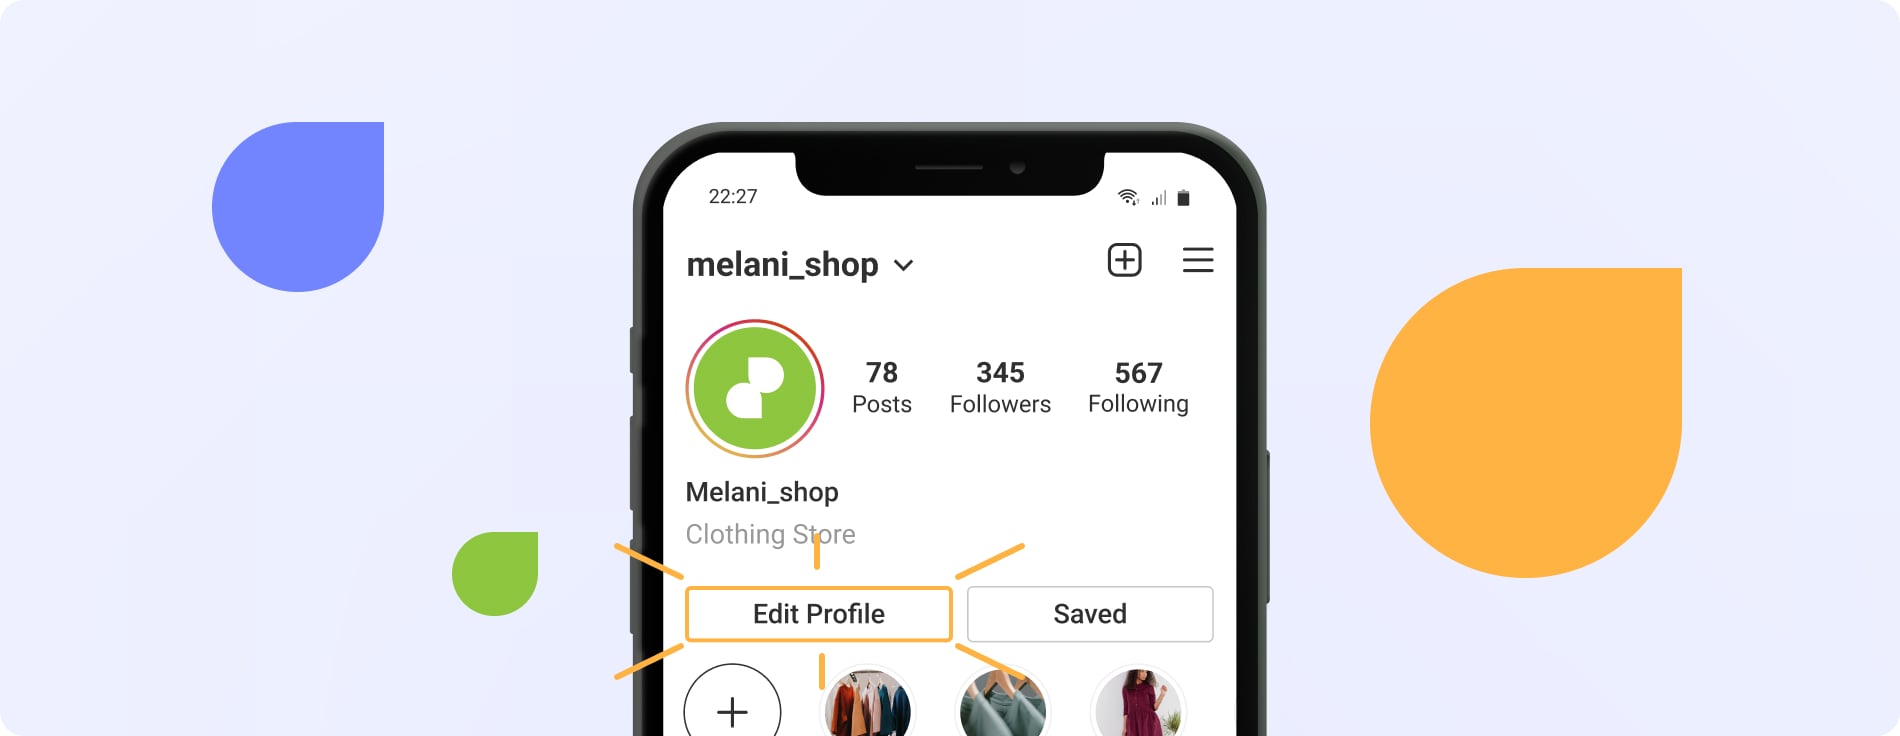 Make changes to your Instagram profile